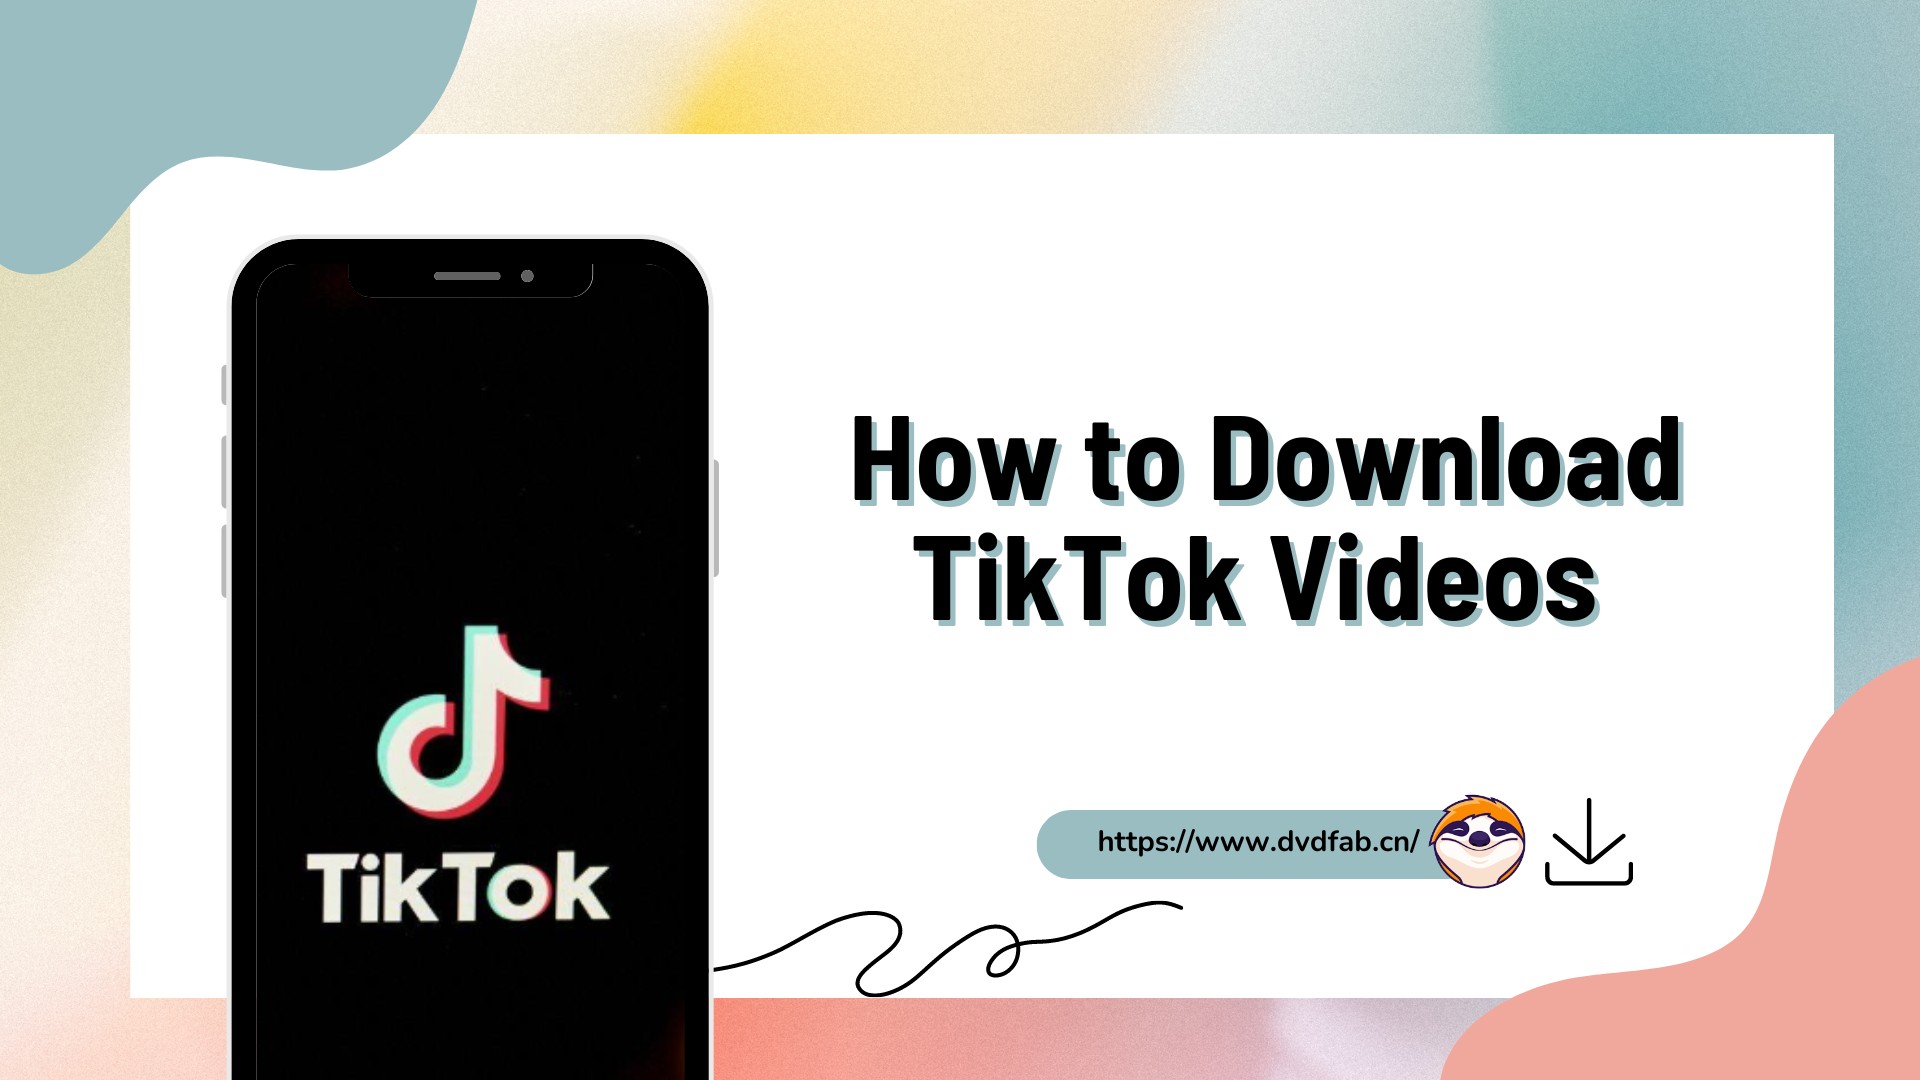 Downalod TikTok Videos in the Format of MP4 and No Watermark